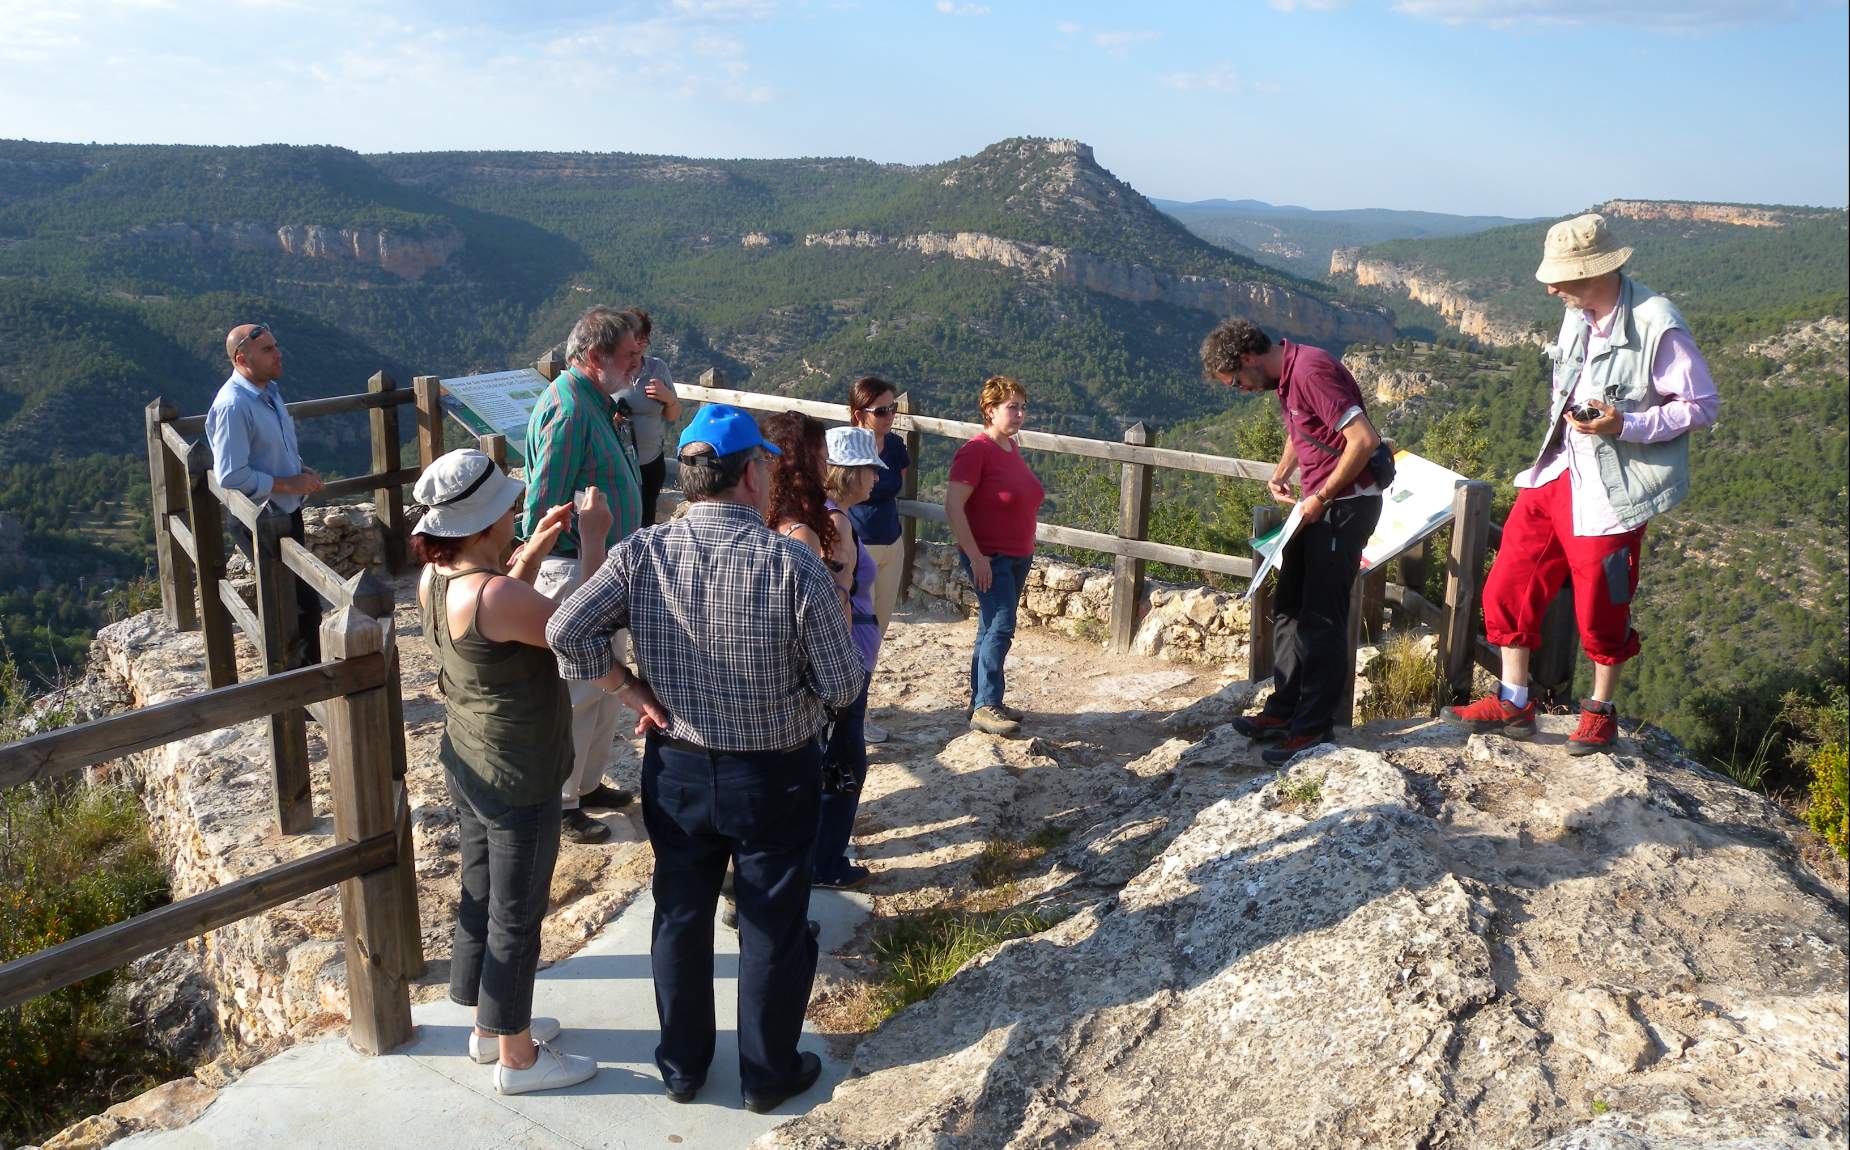 Several people with a guide on a mountain